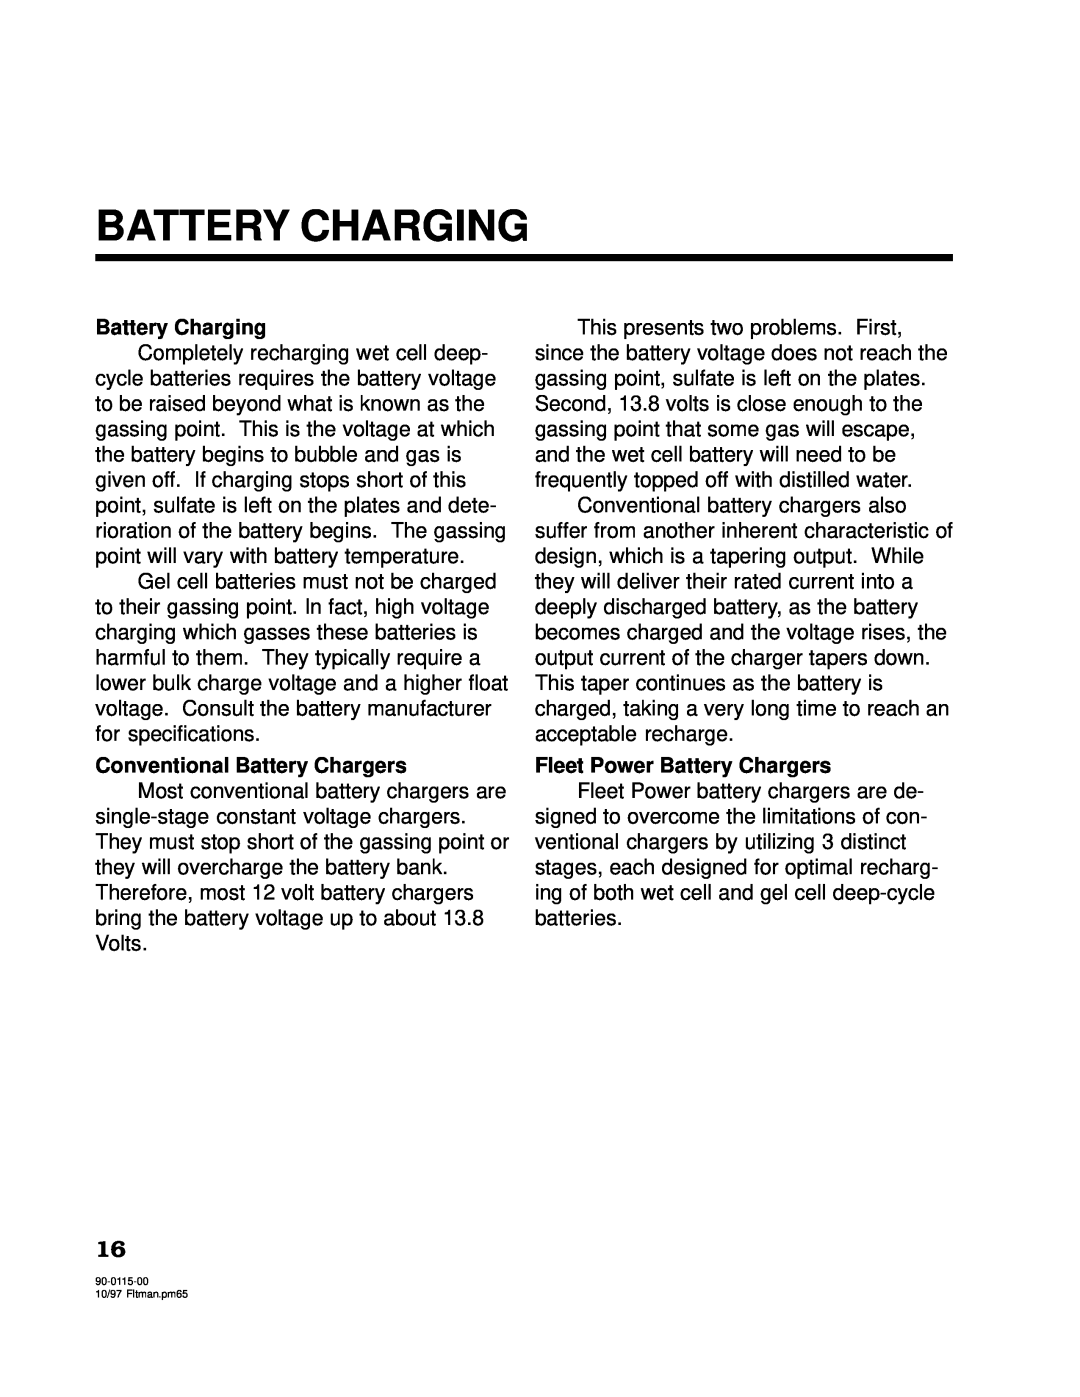 Xantrex Technology 2500, 2000 owner manual Battery Charging, Conventional Battery Chargers, Fleet Power Battery Chargers 